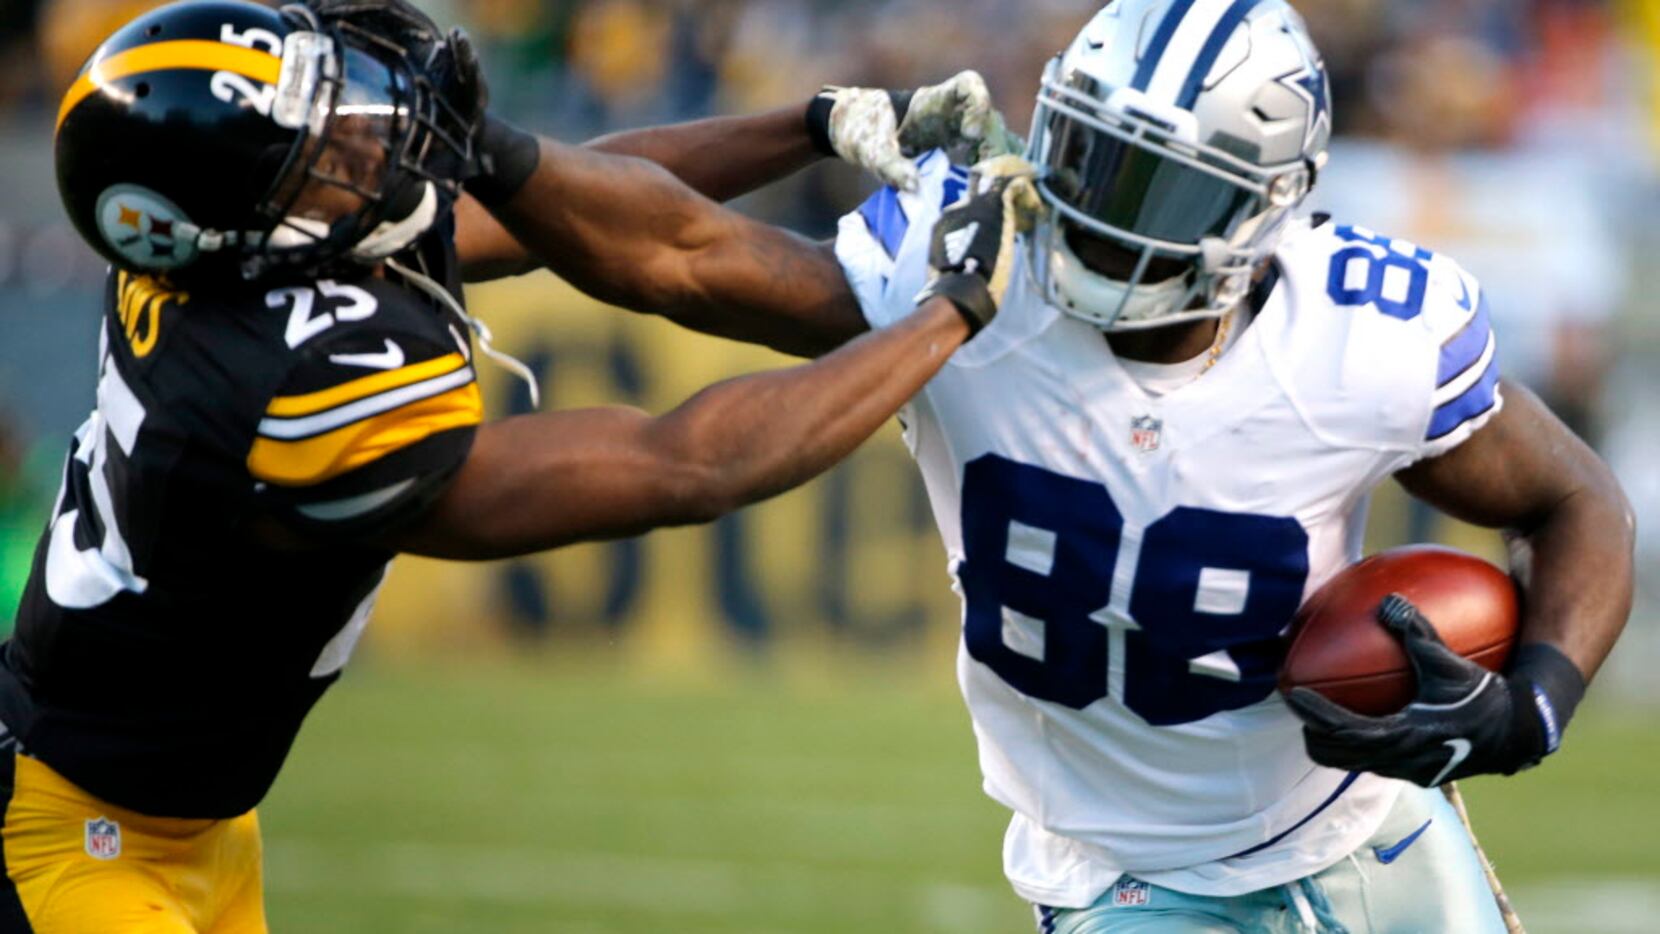 The Cowboys' 35-30 win over the Steelers was the most entertaining